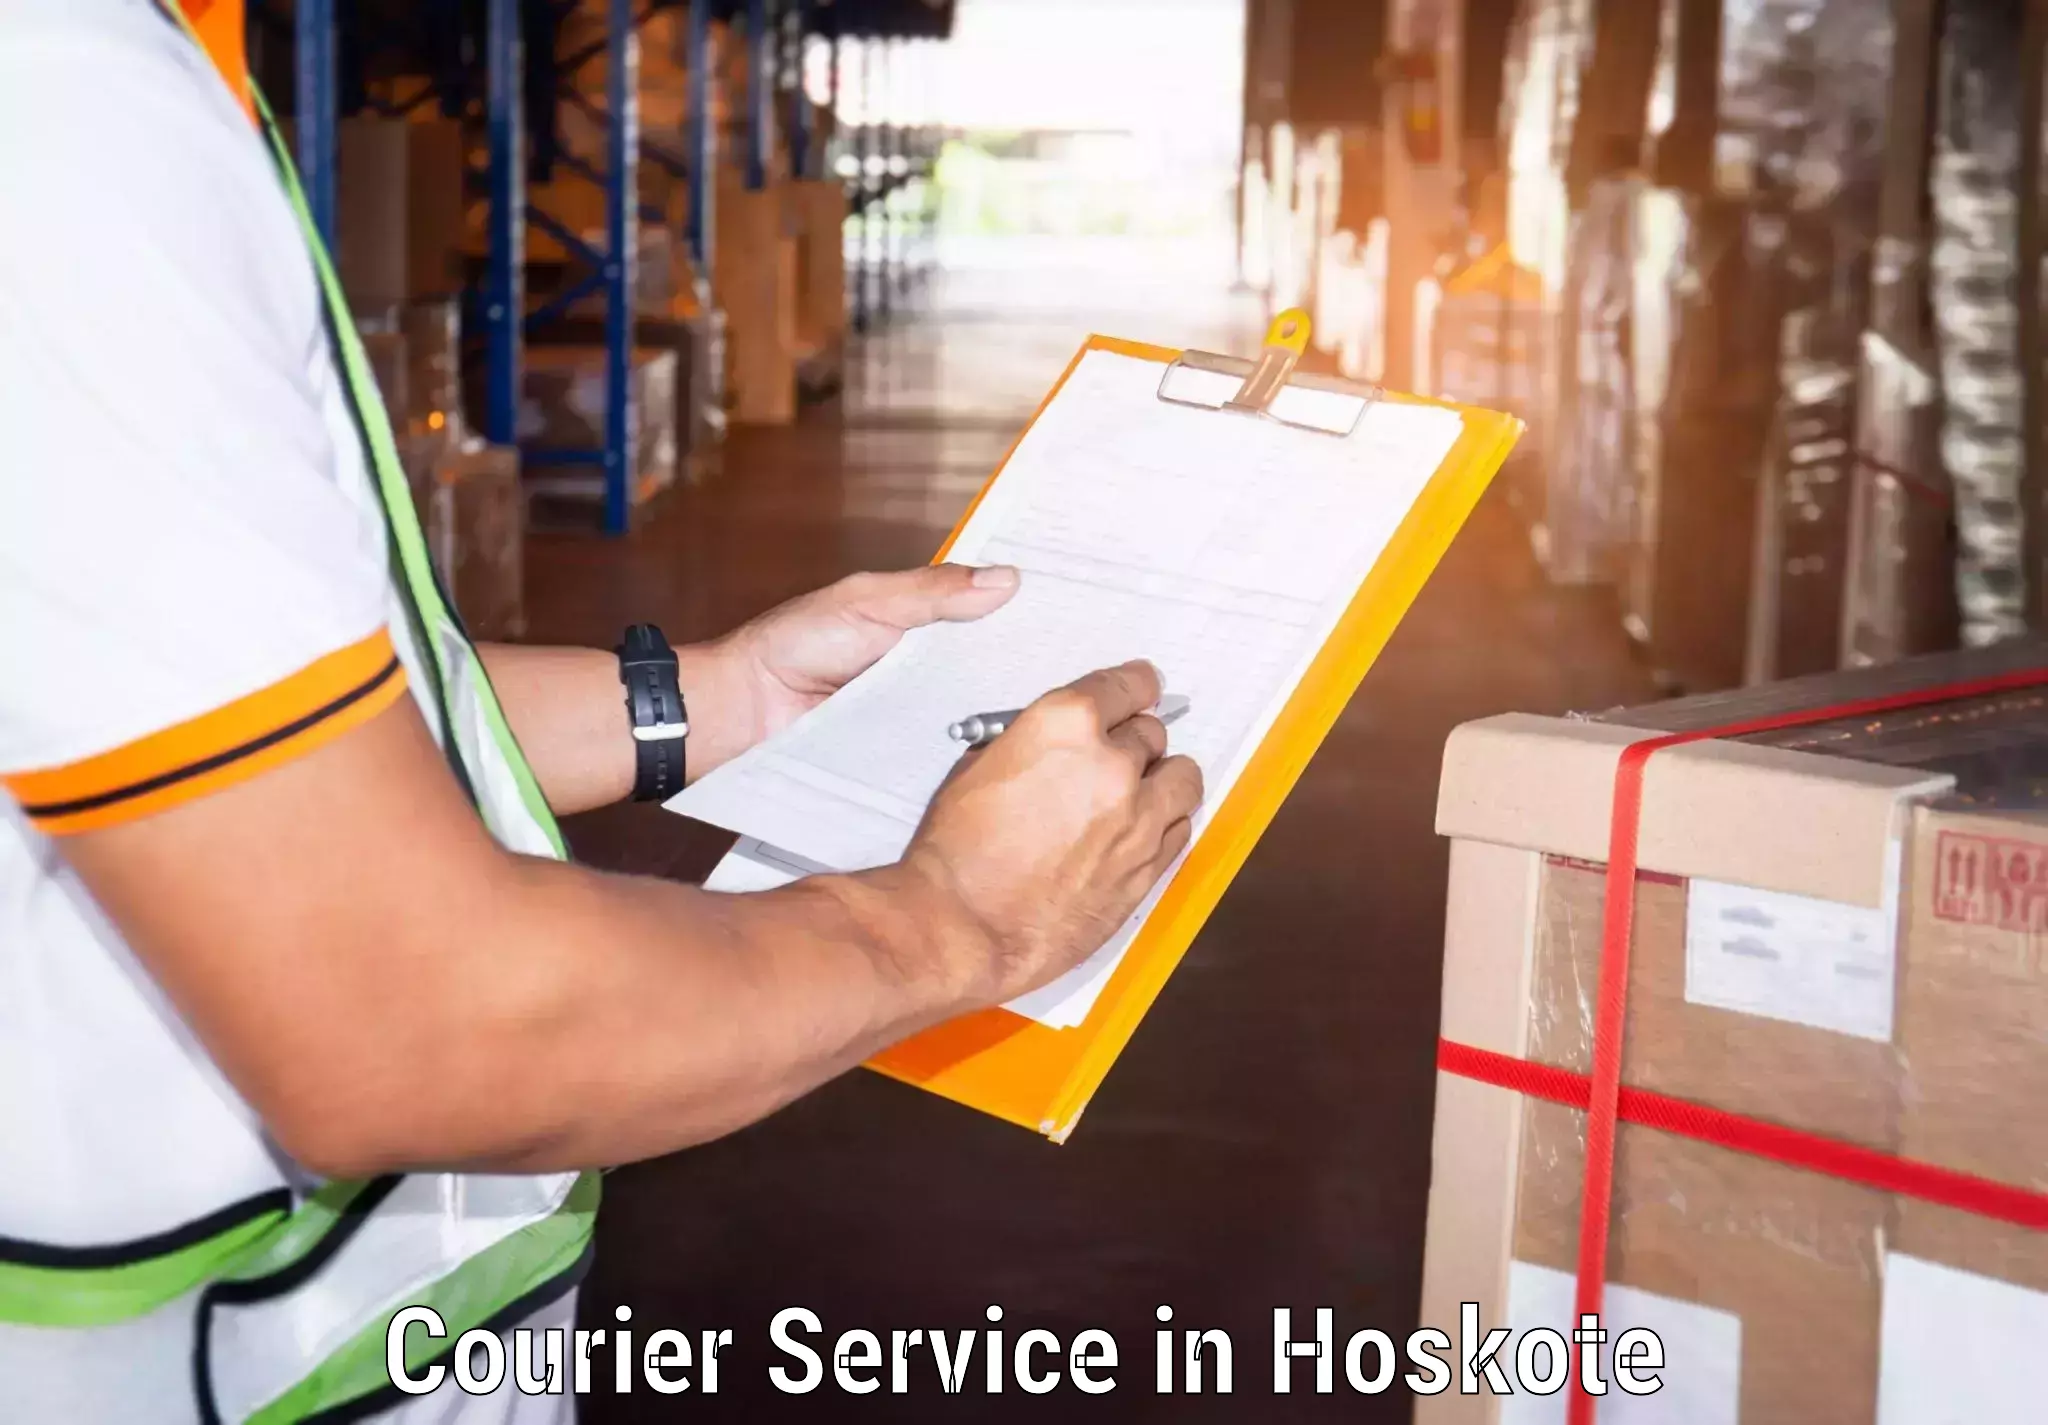 Courier services in Hoskote